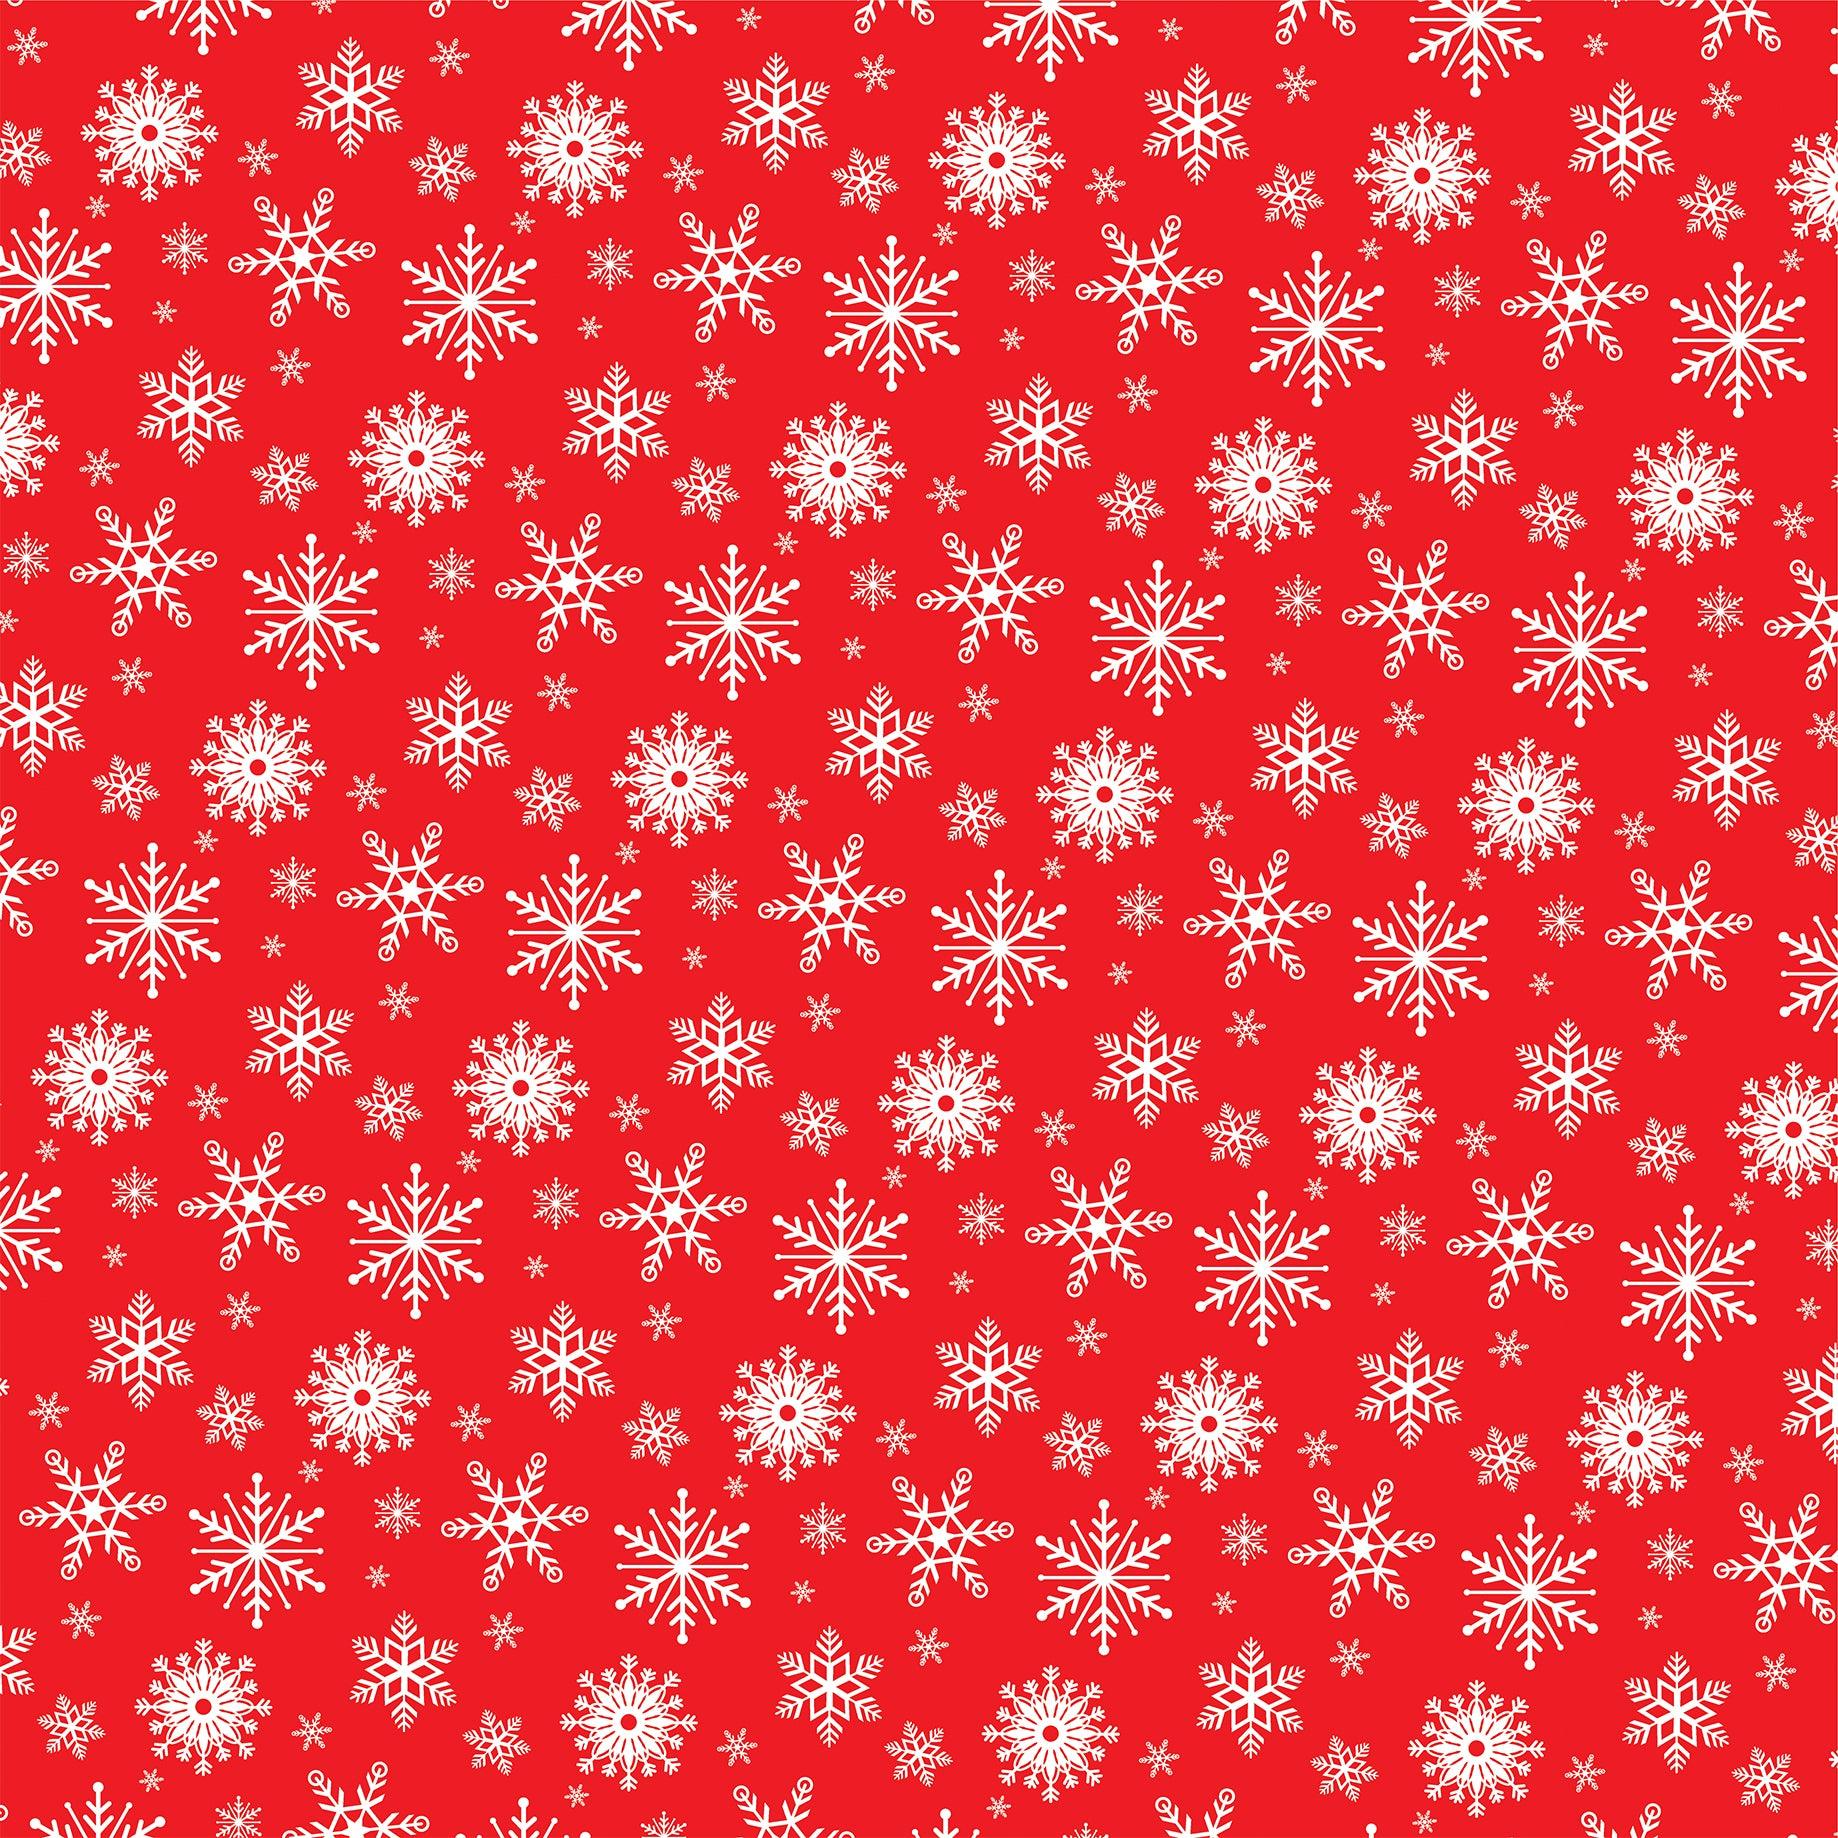 Christmas Cheer Collection Christmas Wish 12 x 12 Double-Sided Scrapbook Paper by Carta Bella - Scrapbook Supply Companies